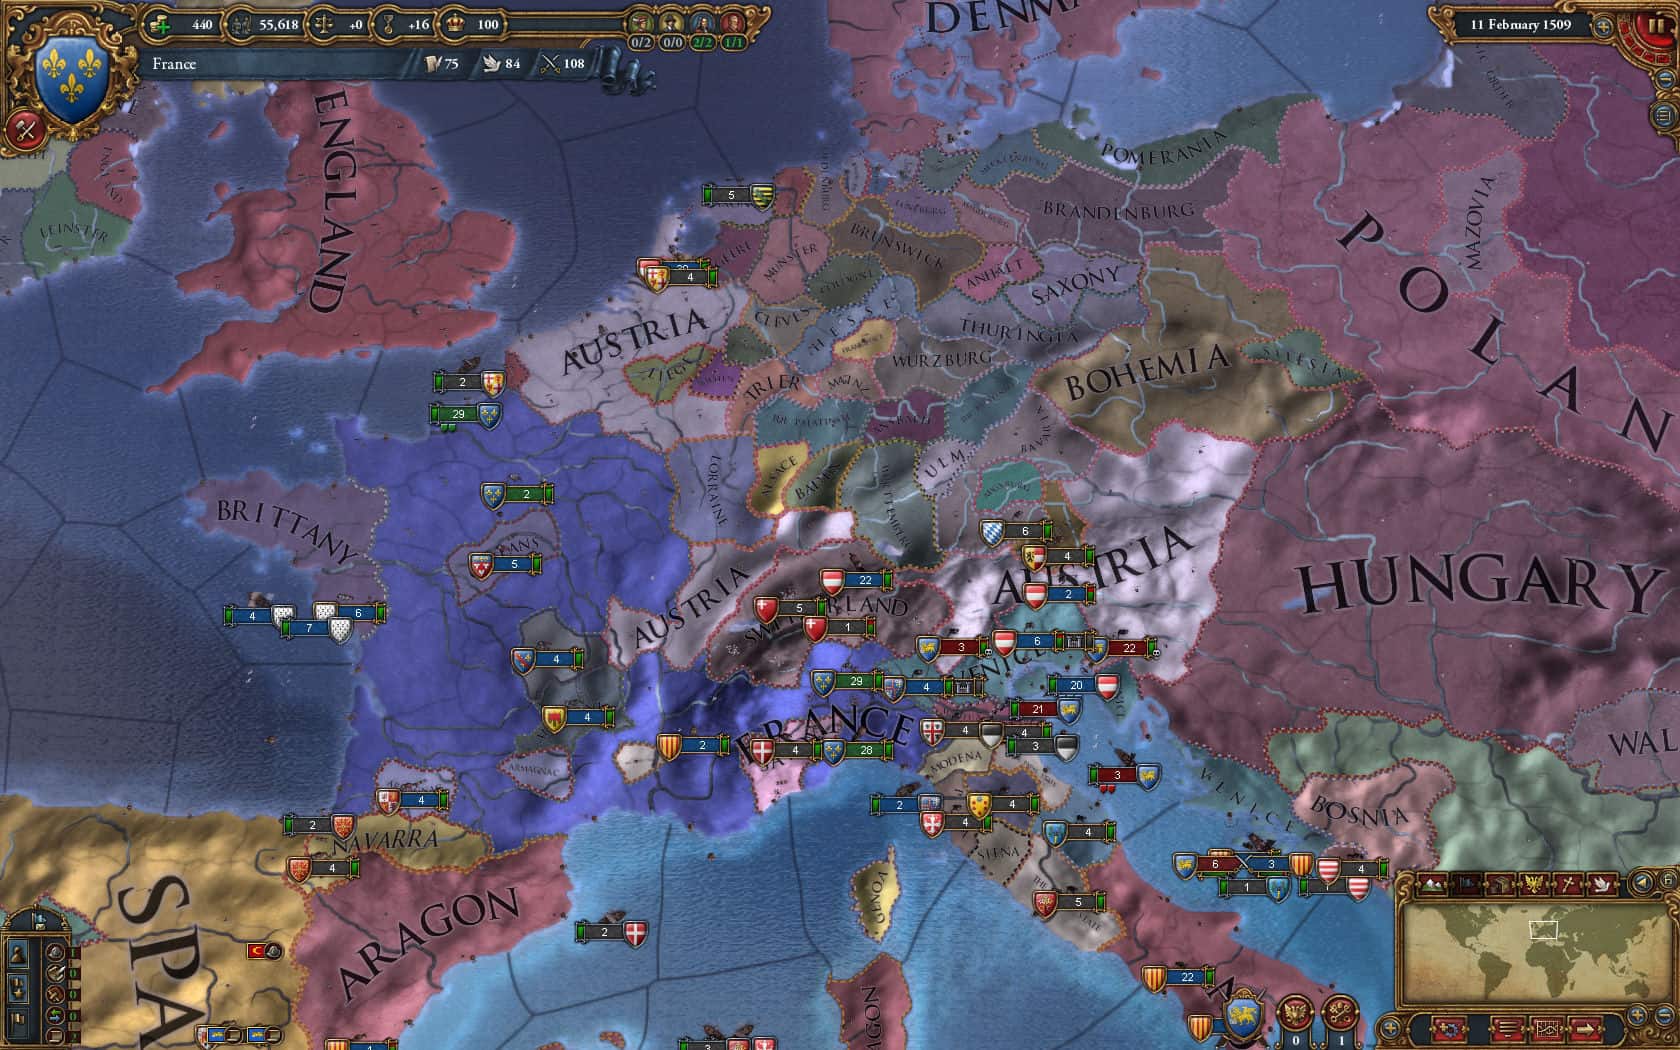 Europa Universalis 4 is free on Epic Store right now